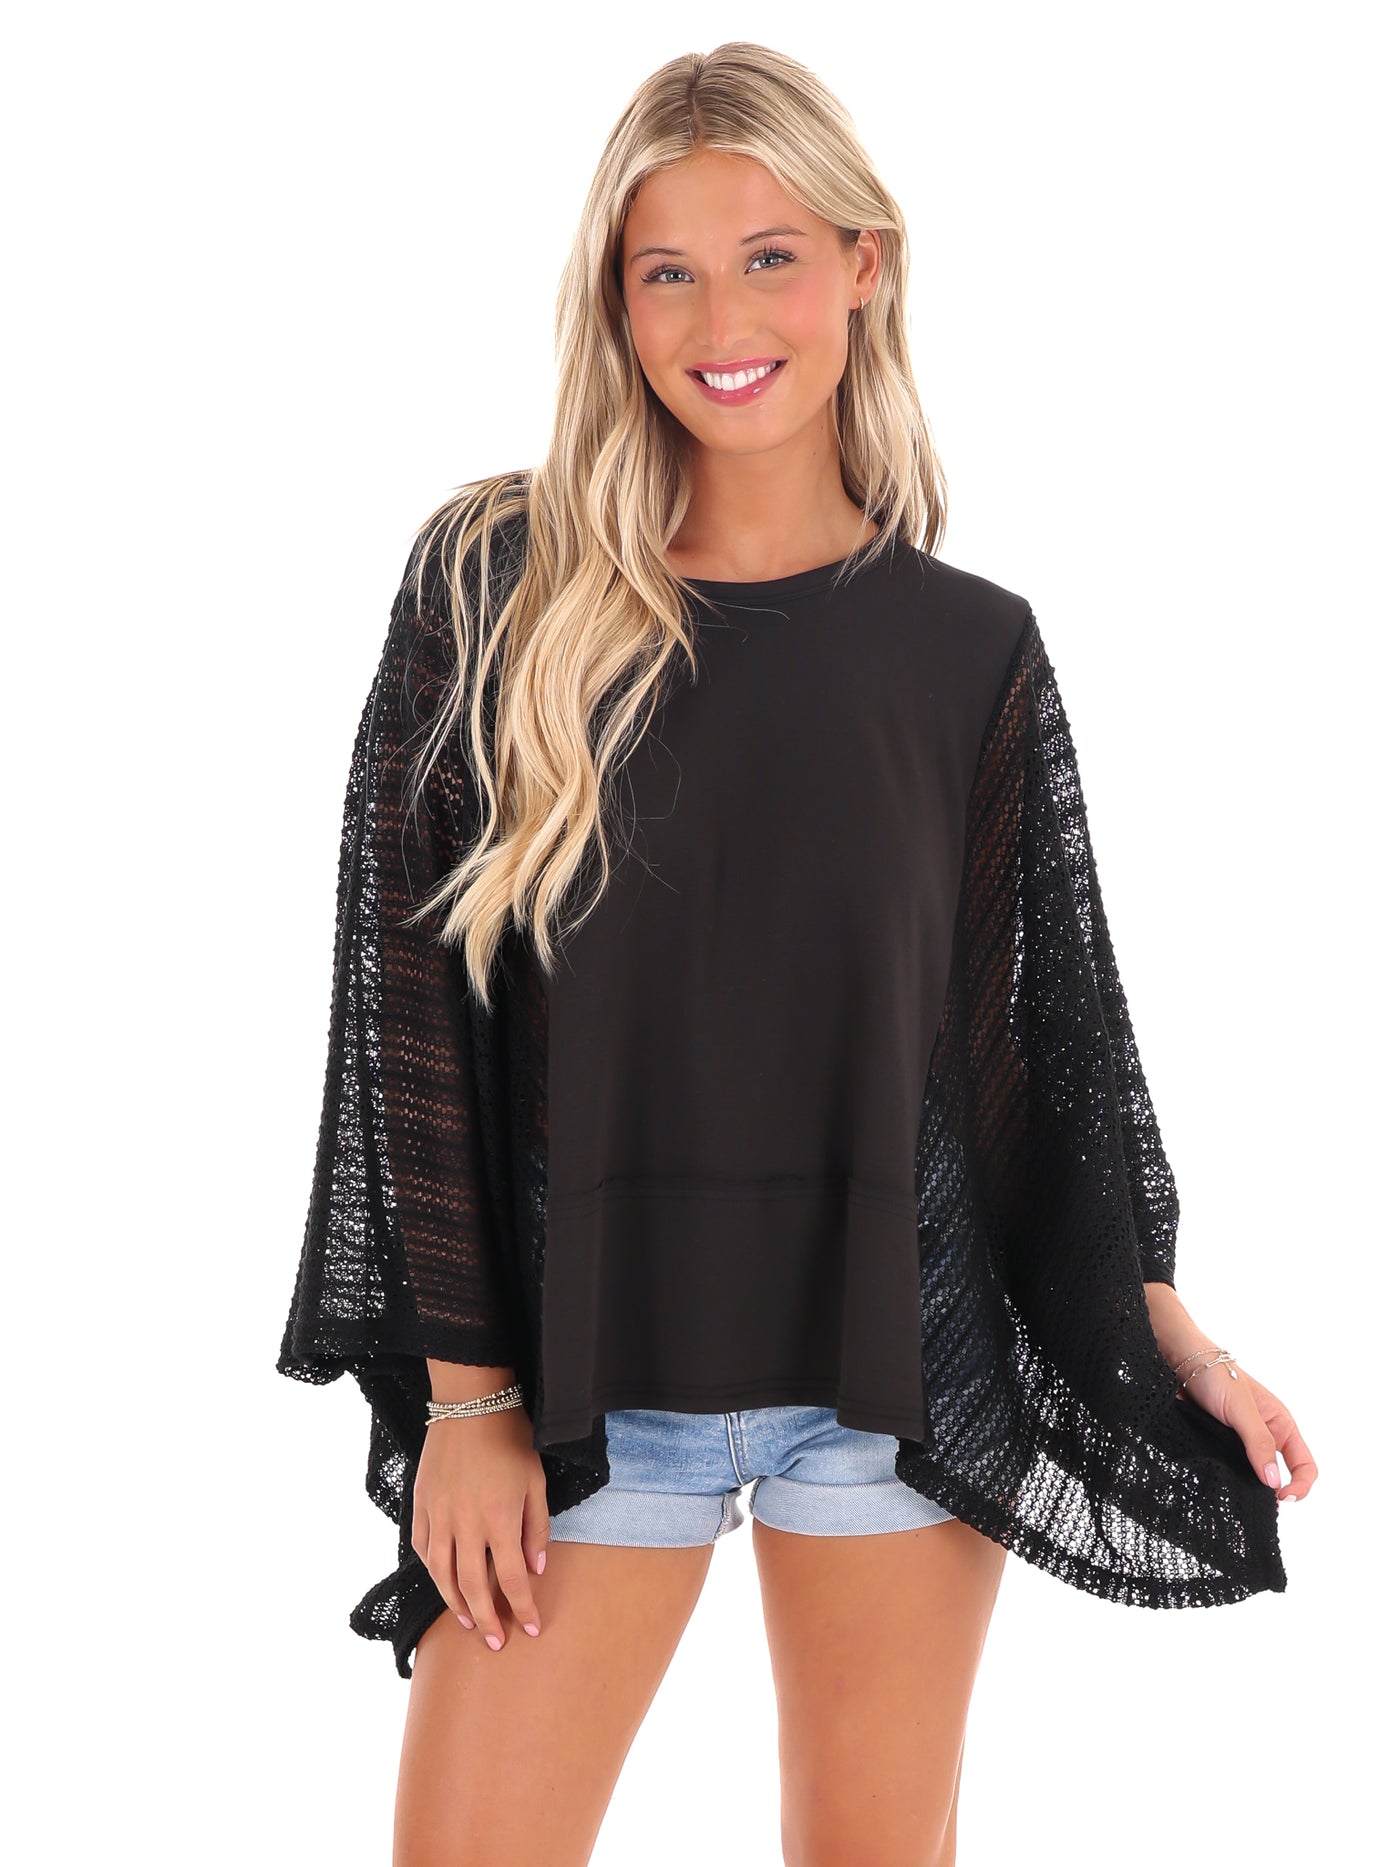 Unfiltered Joy Poncho Top